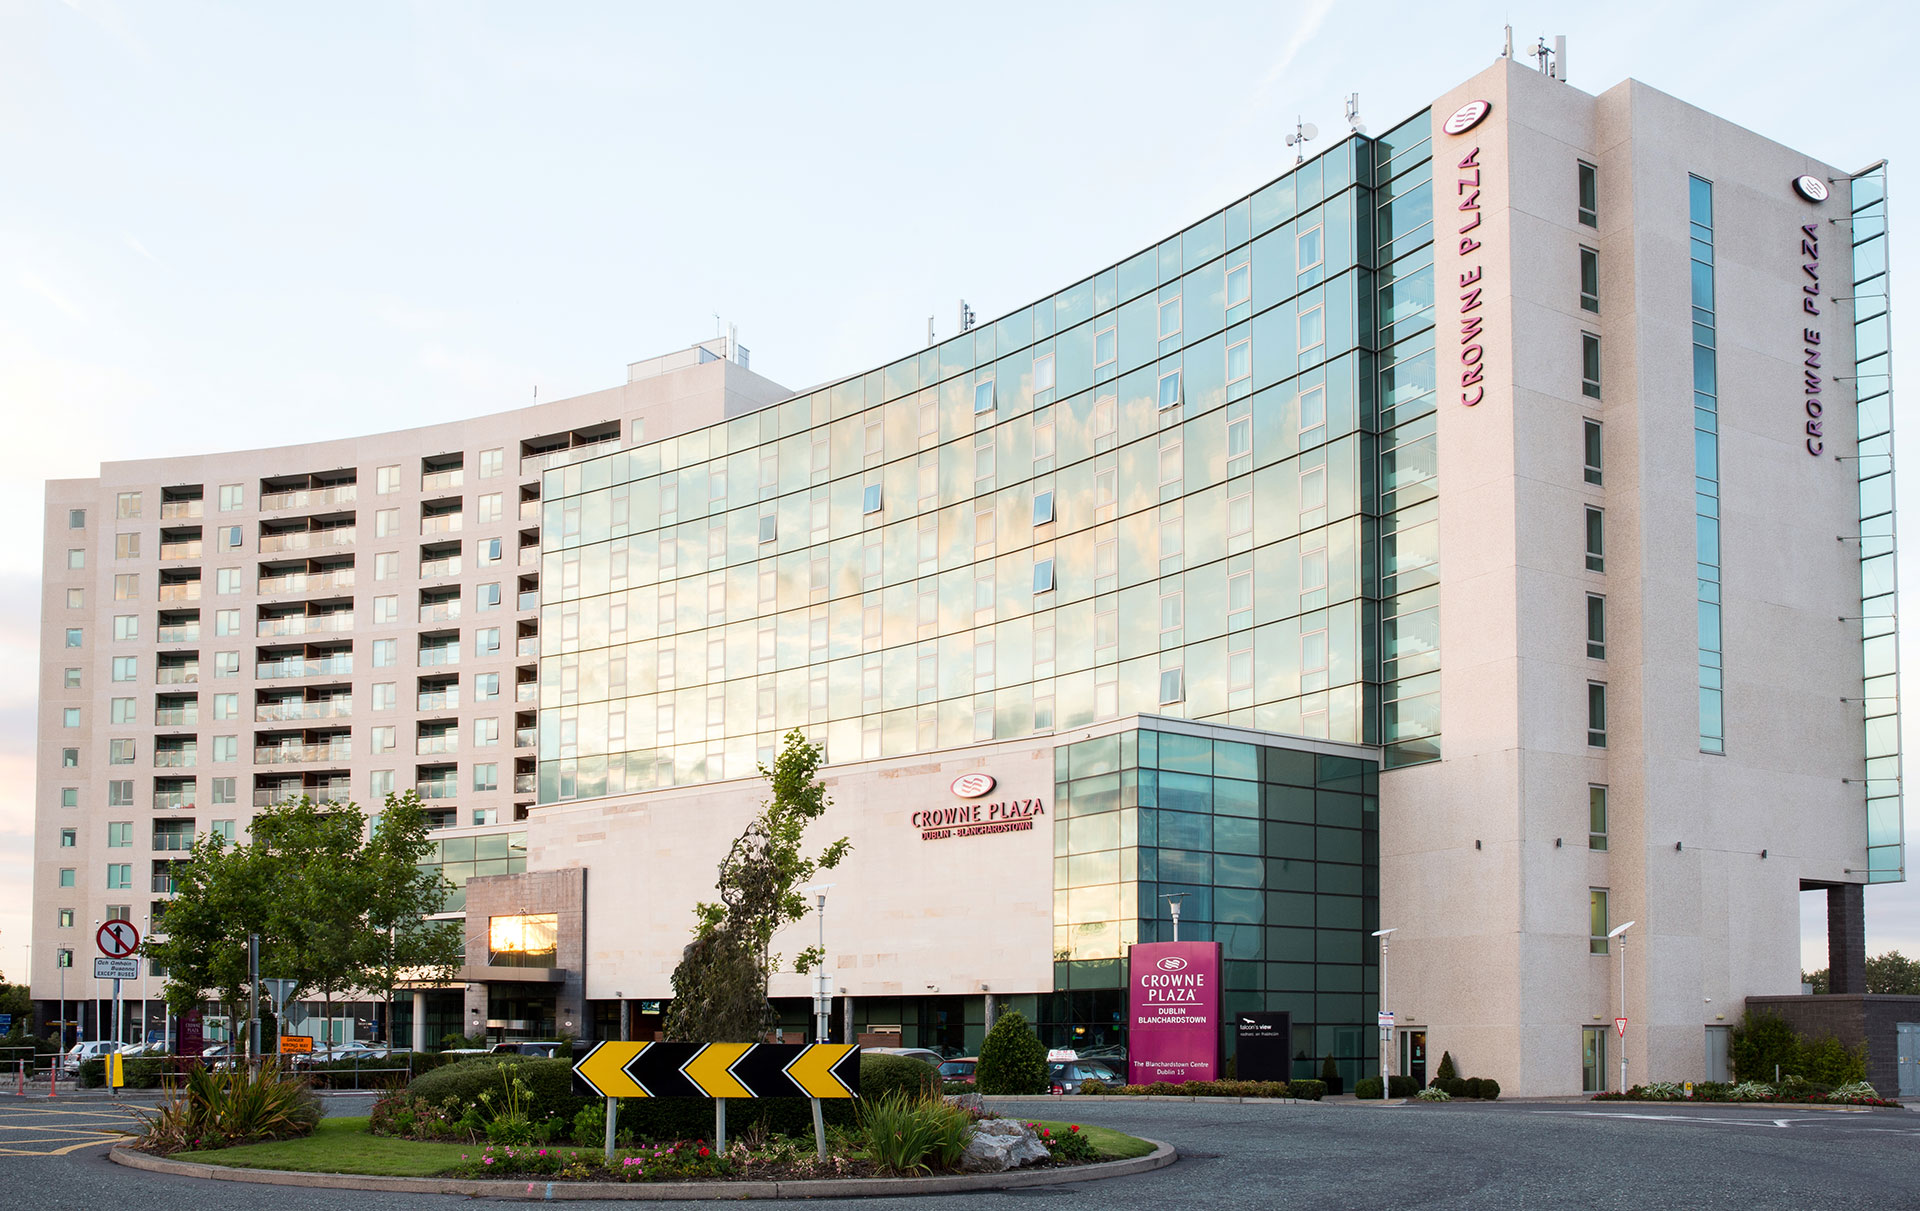 Crowne Plaza Blanchardstown exterior image with entrance